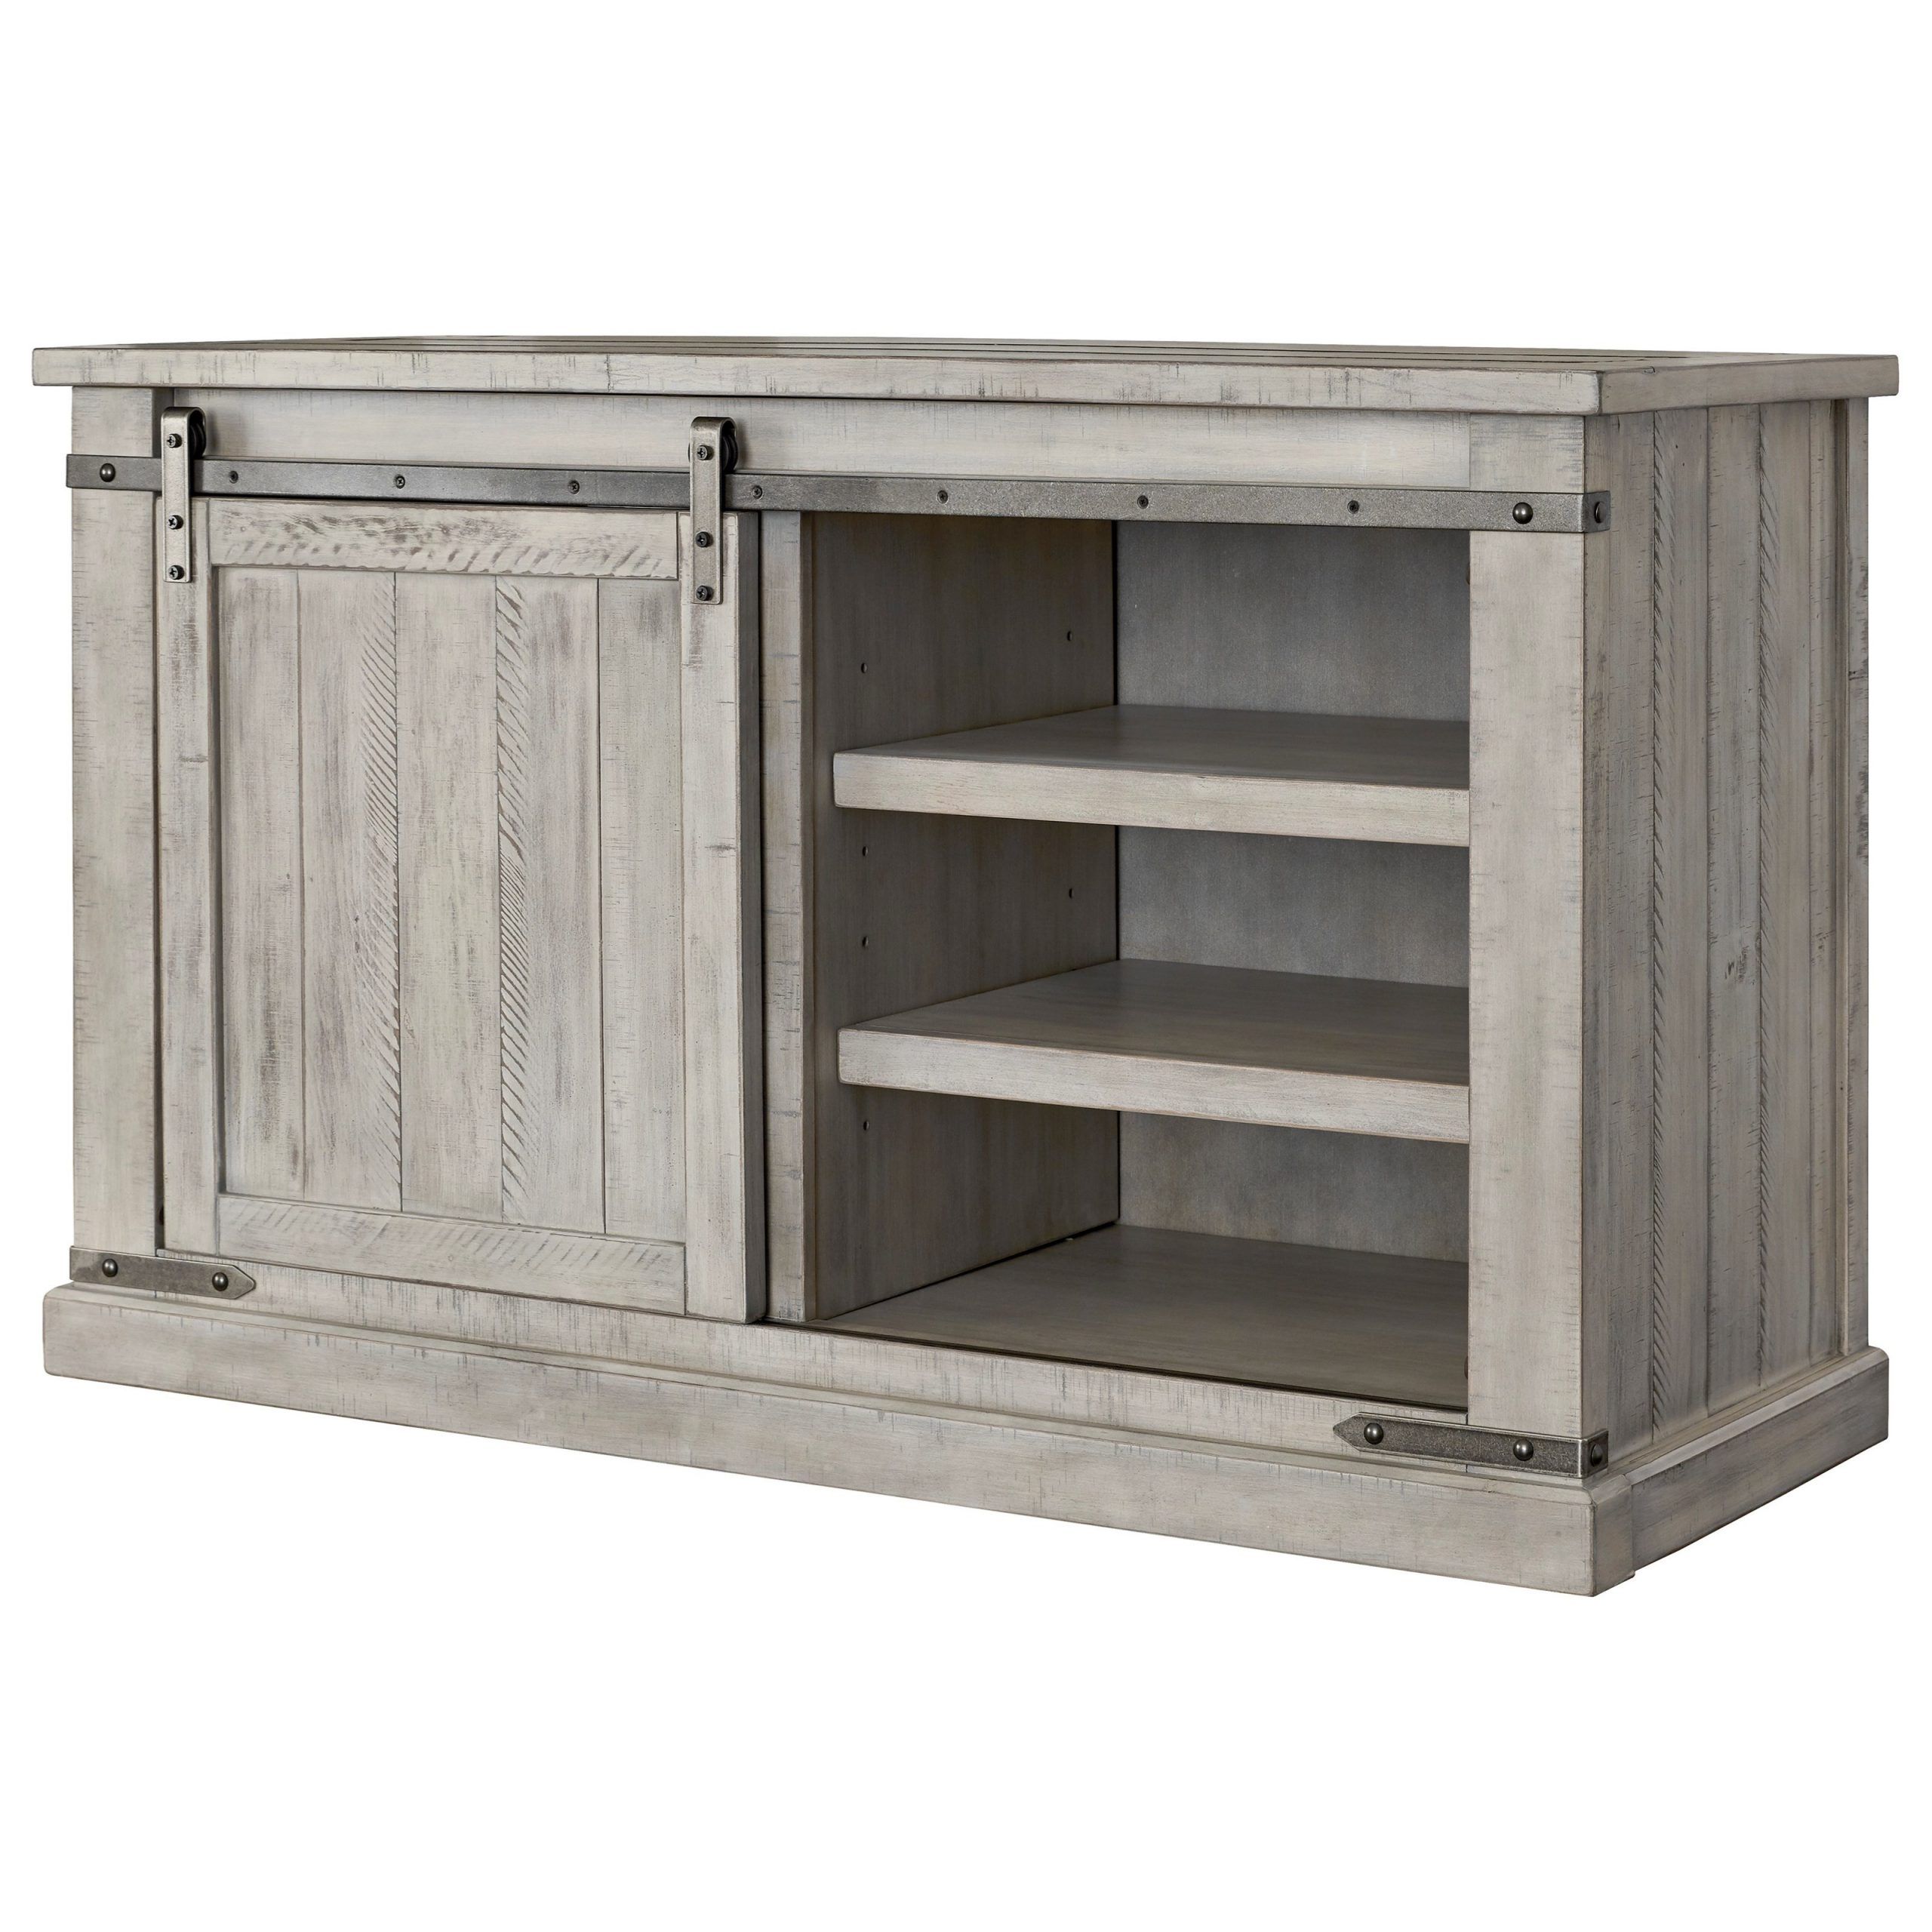 Styleline Carynhurst W755 28 Rustic White Medium Tv Stand Pertaining To Tv Stands With Table Storage Cabinet In Rustic Gray Wash (Gallery 12 of 20)